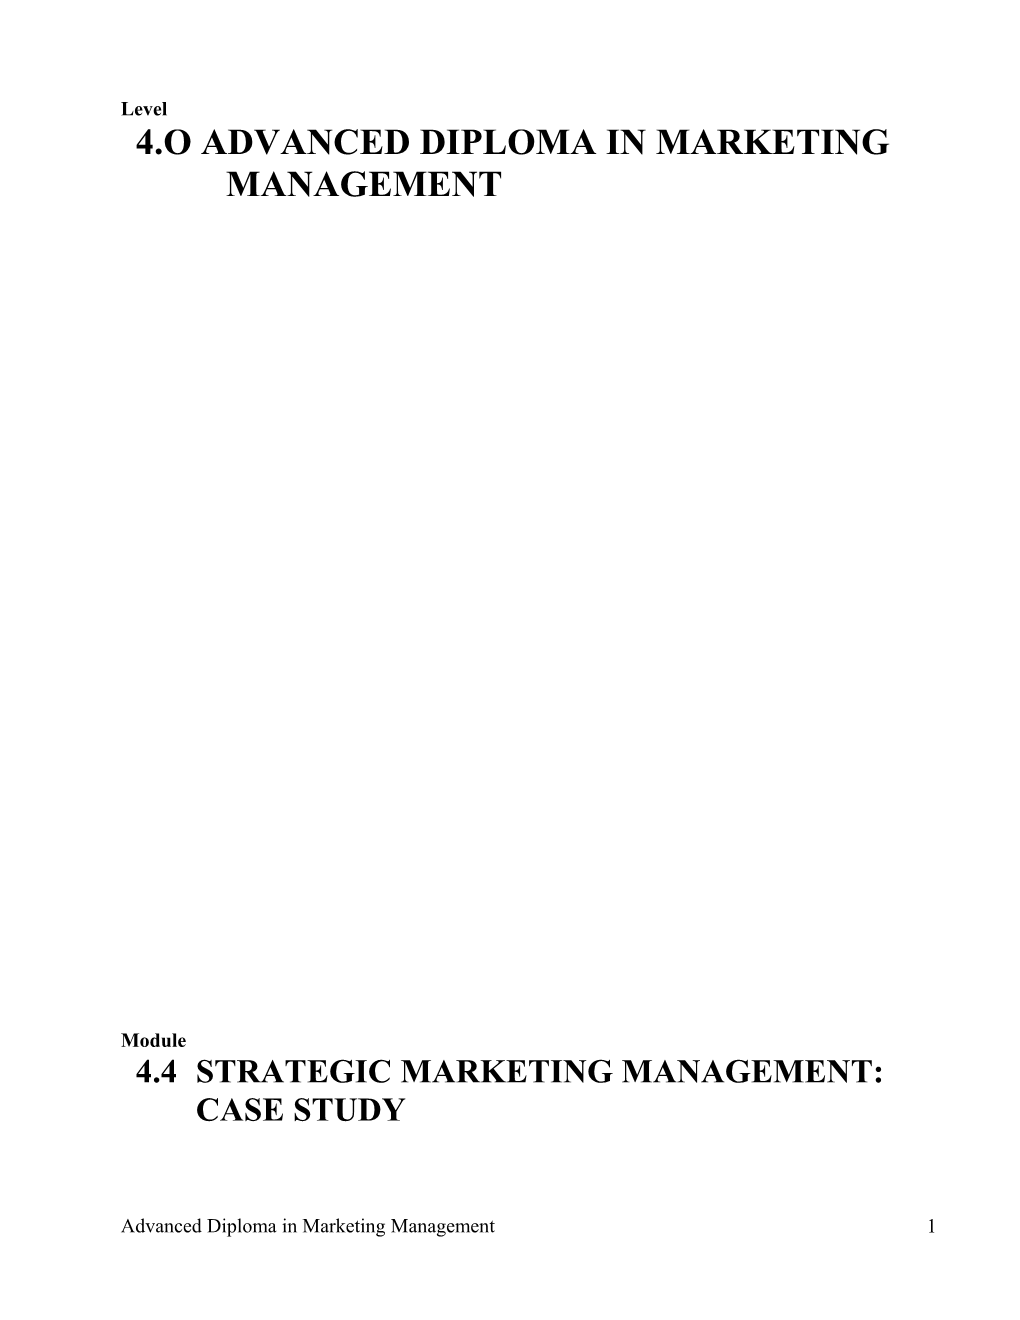 4.O Advanced Diploma in Marketing Management